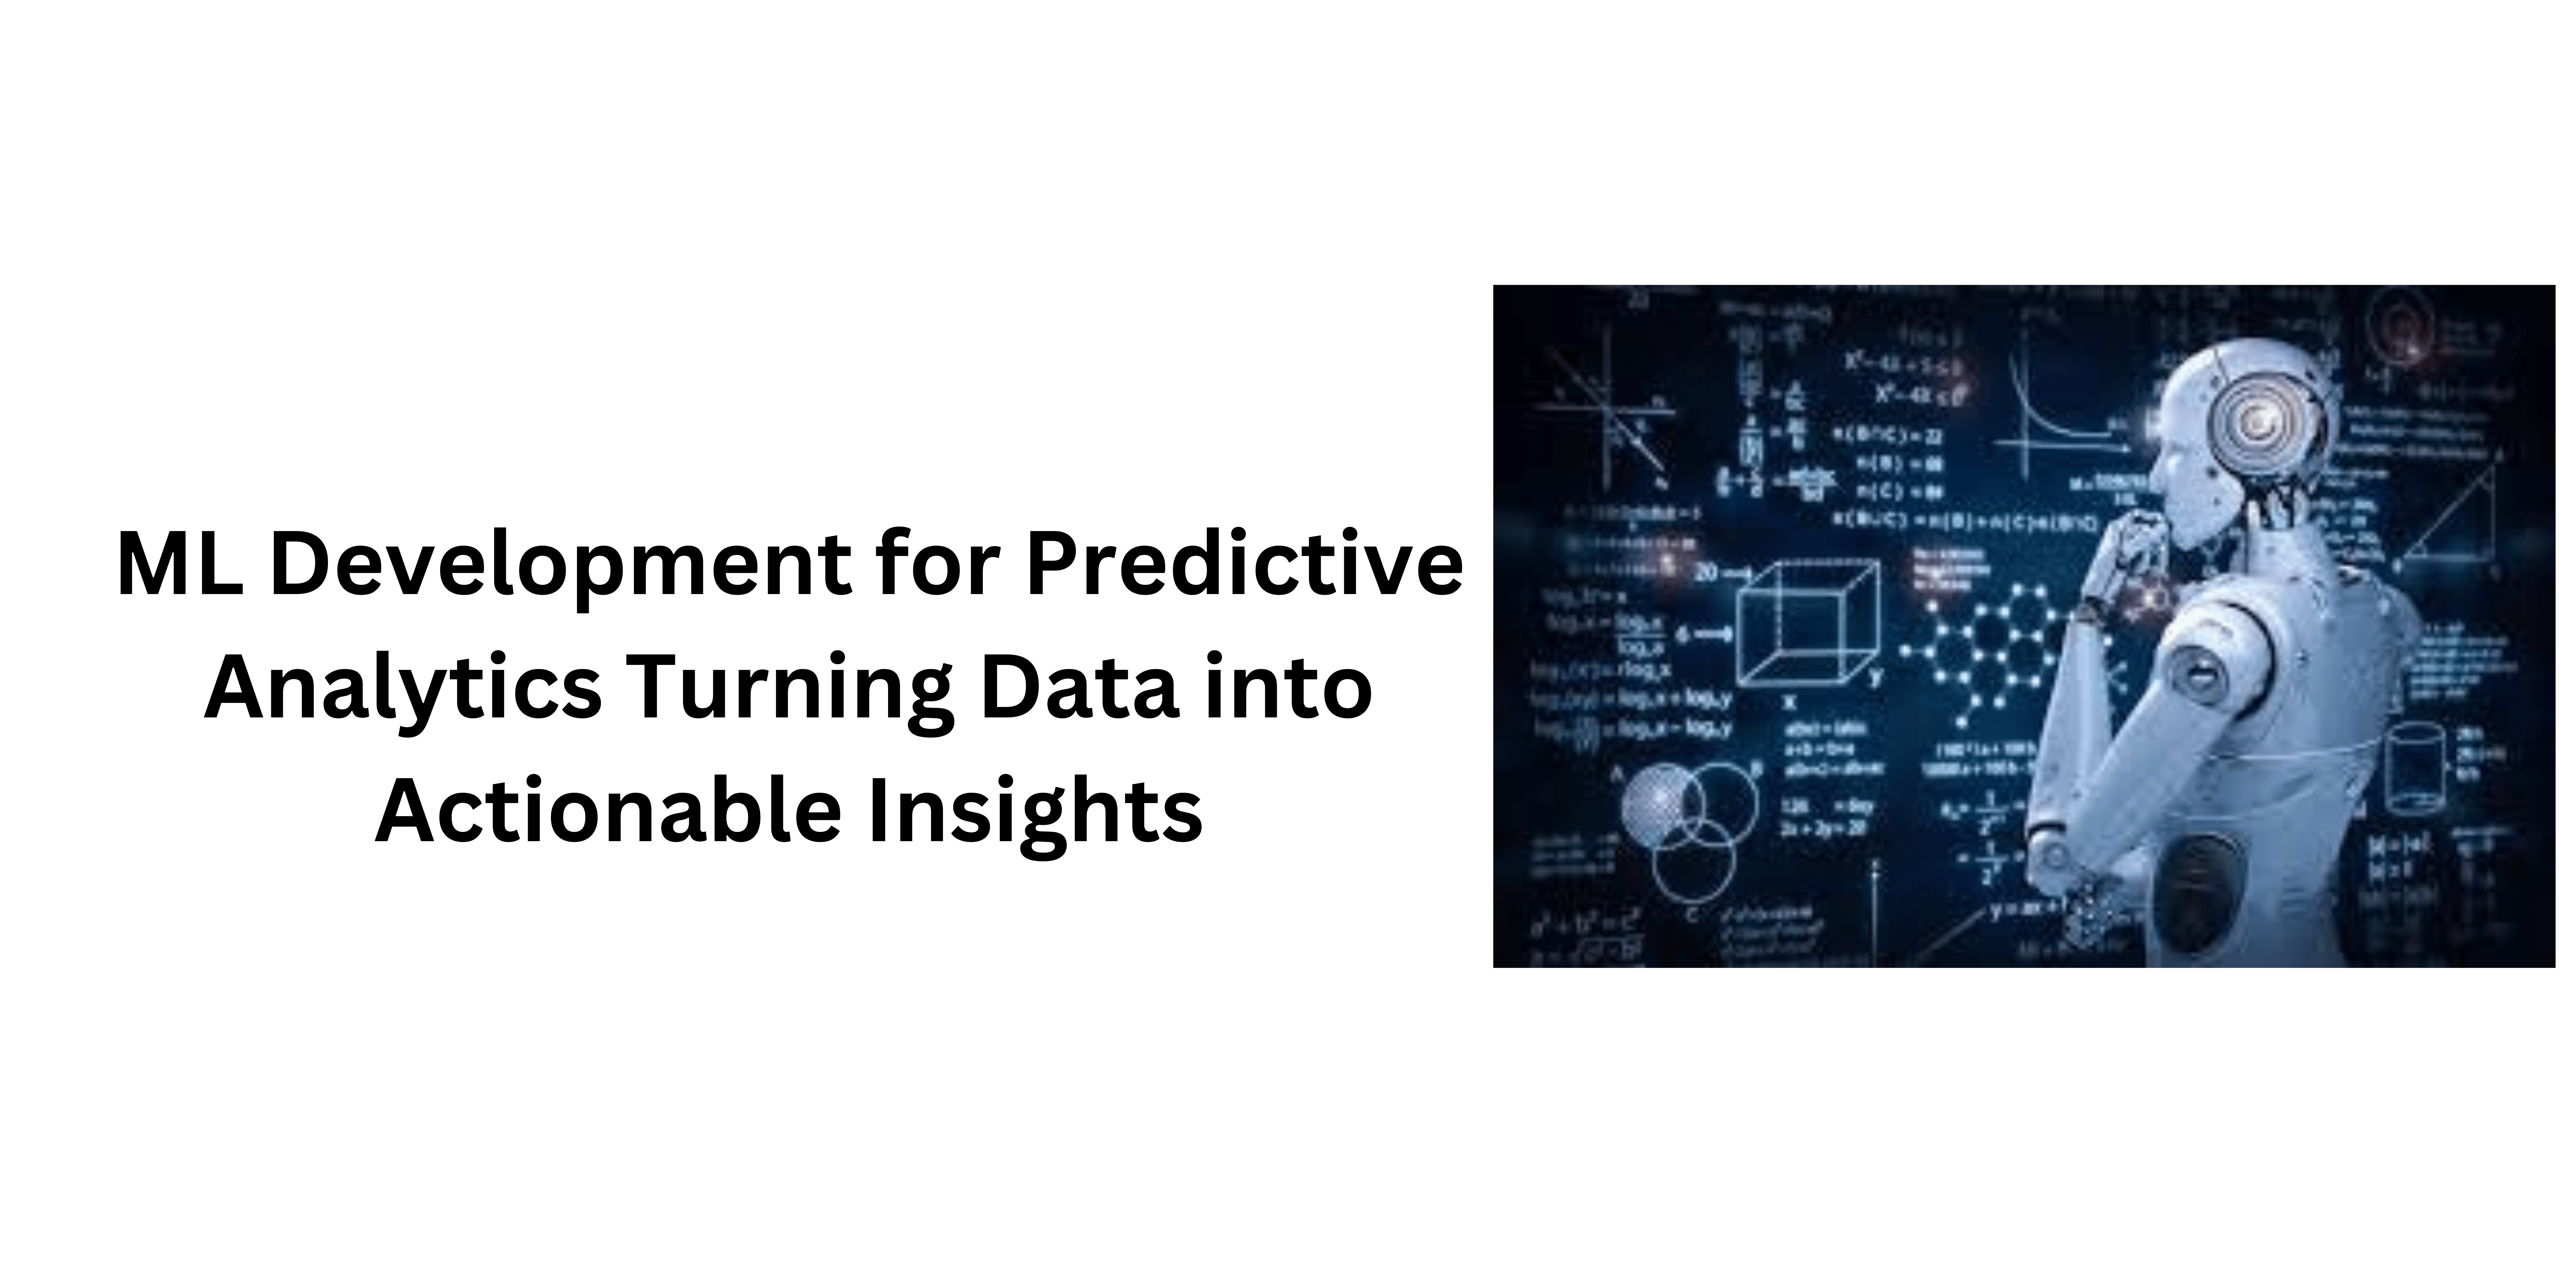 ML Development for Predictive Analytics Turning Data into Actionable Insights